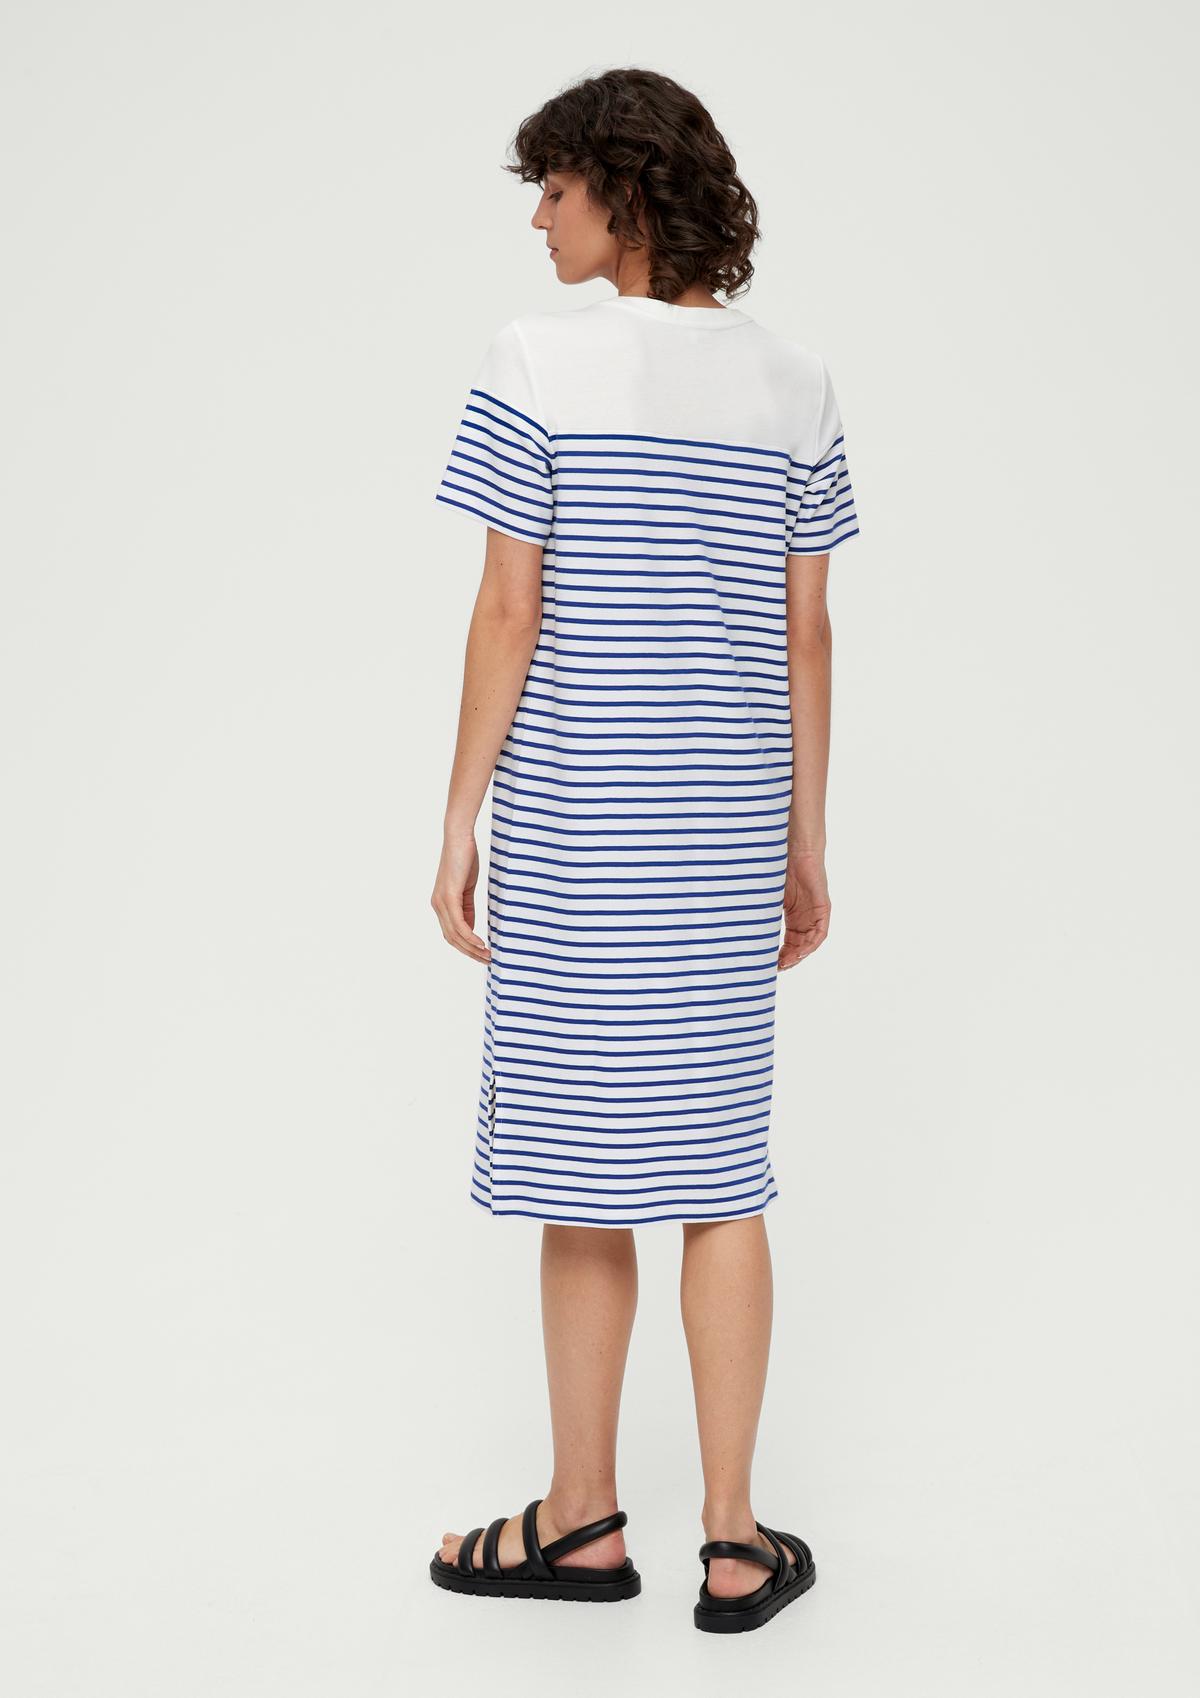 s.Oliver T-shirt dress made of pure cotton